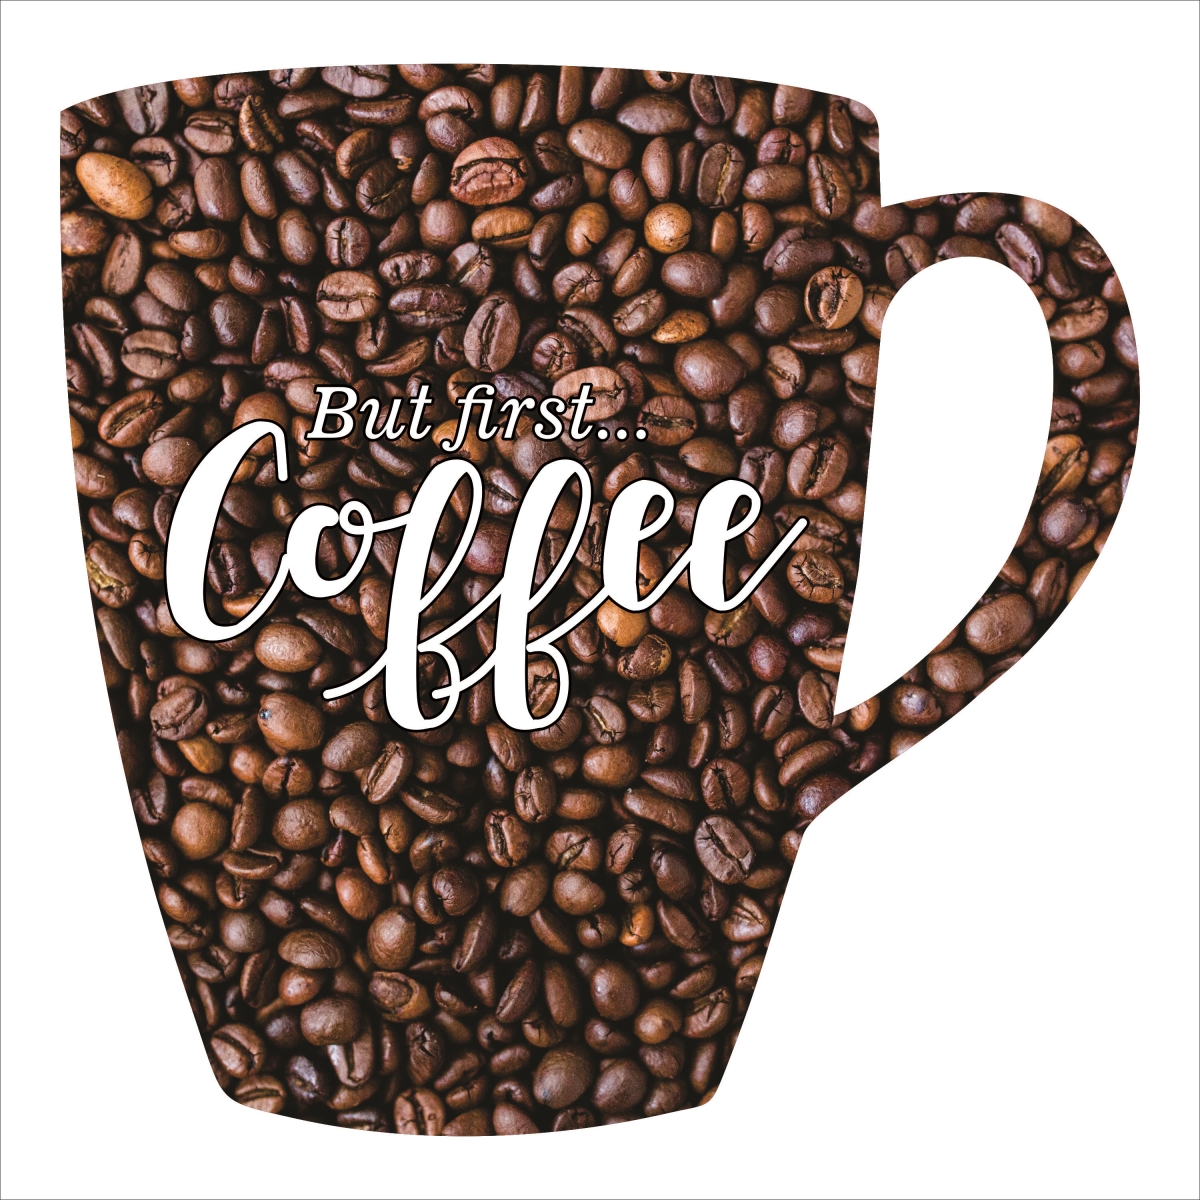 Coffee-18beans 18 In. Leisure Coffee Mug Silhouette Metal Laser Cut Wall Art With Vivid Image Of Coffee Beans & But First Coffee